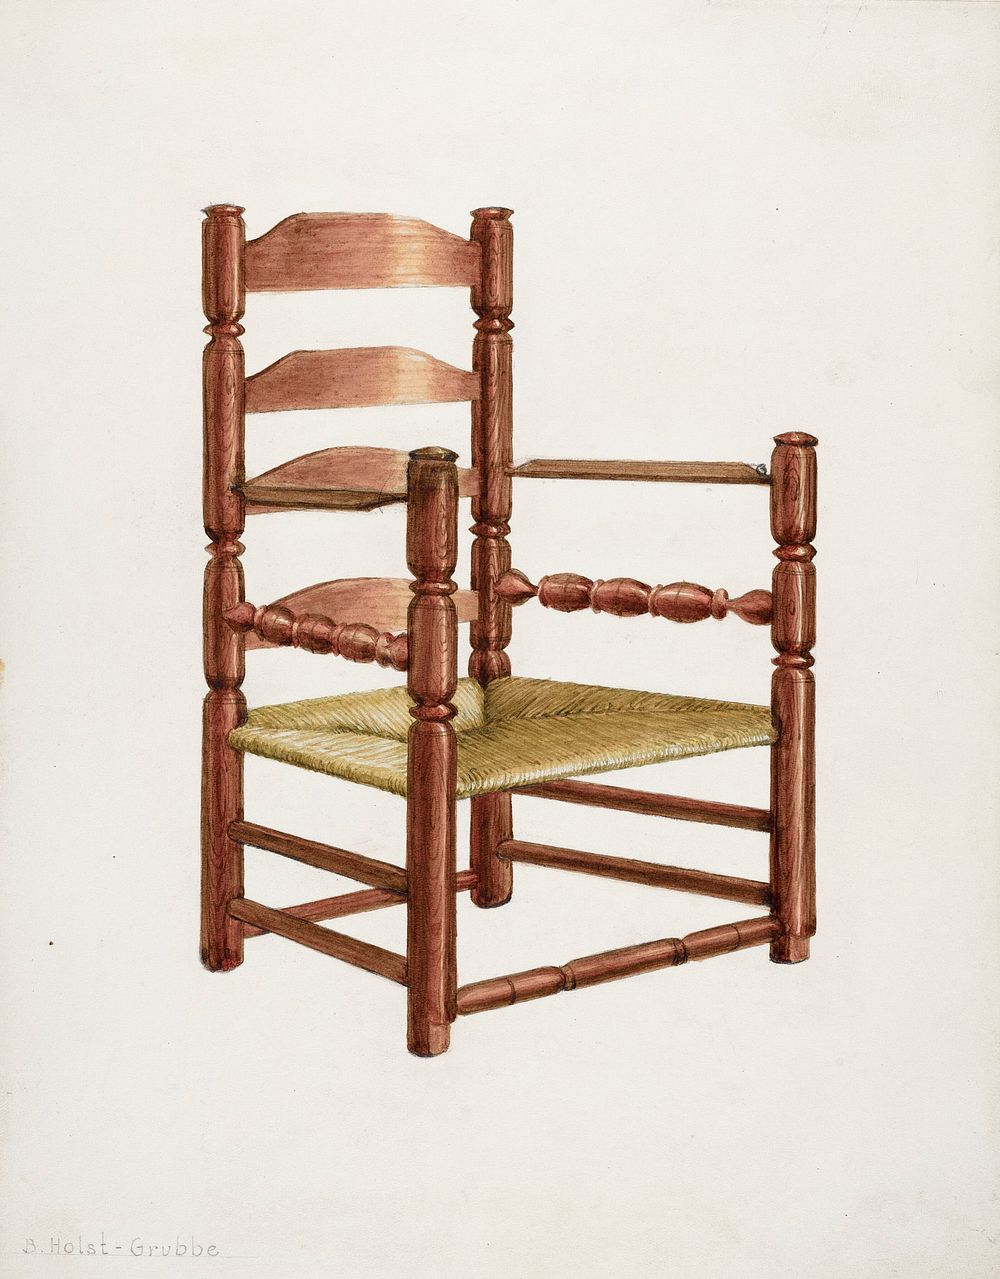 Chair (1935&ndash;1942) by B. Holst Grubbe. Original from The National Gallery of Art. Digitally enhanced by rawpixel.